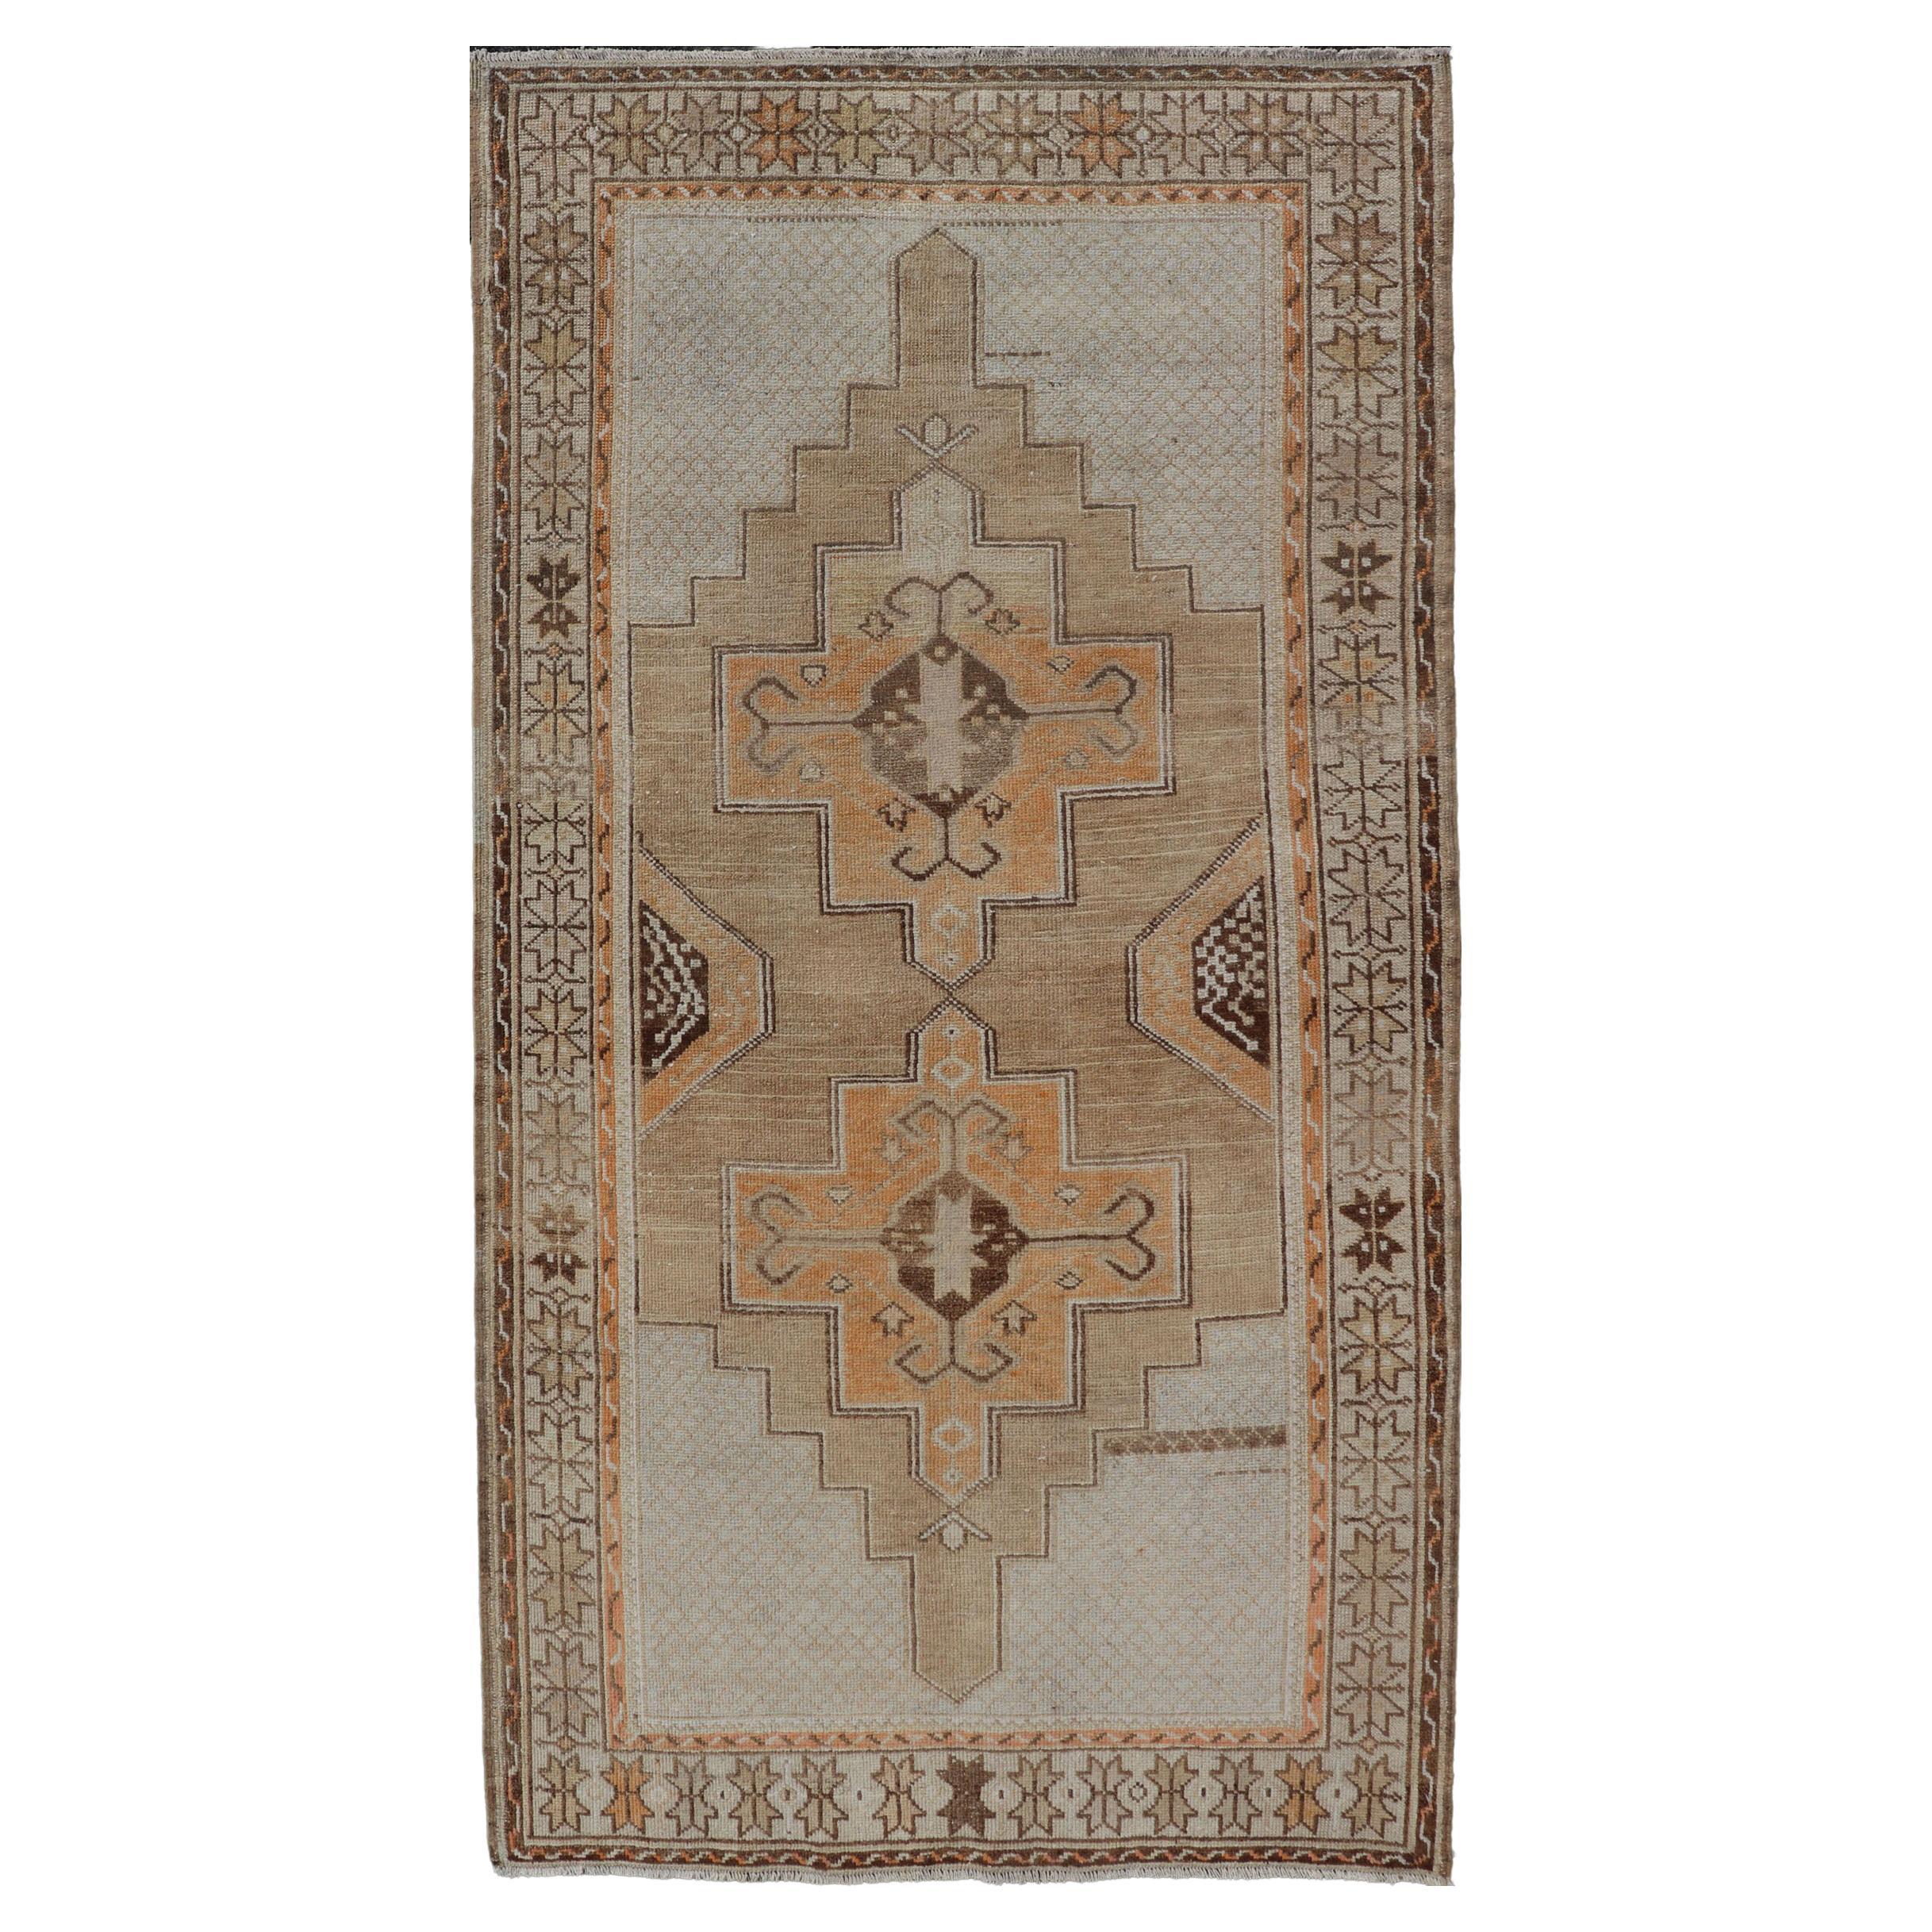 Vintage Turkish Oushak Rug With Medallions in Earthy Color Tones with Orange